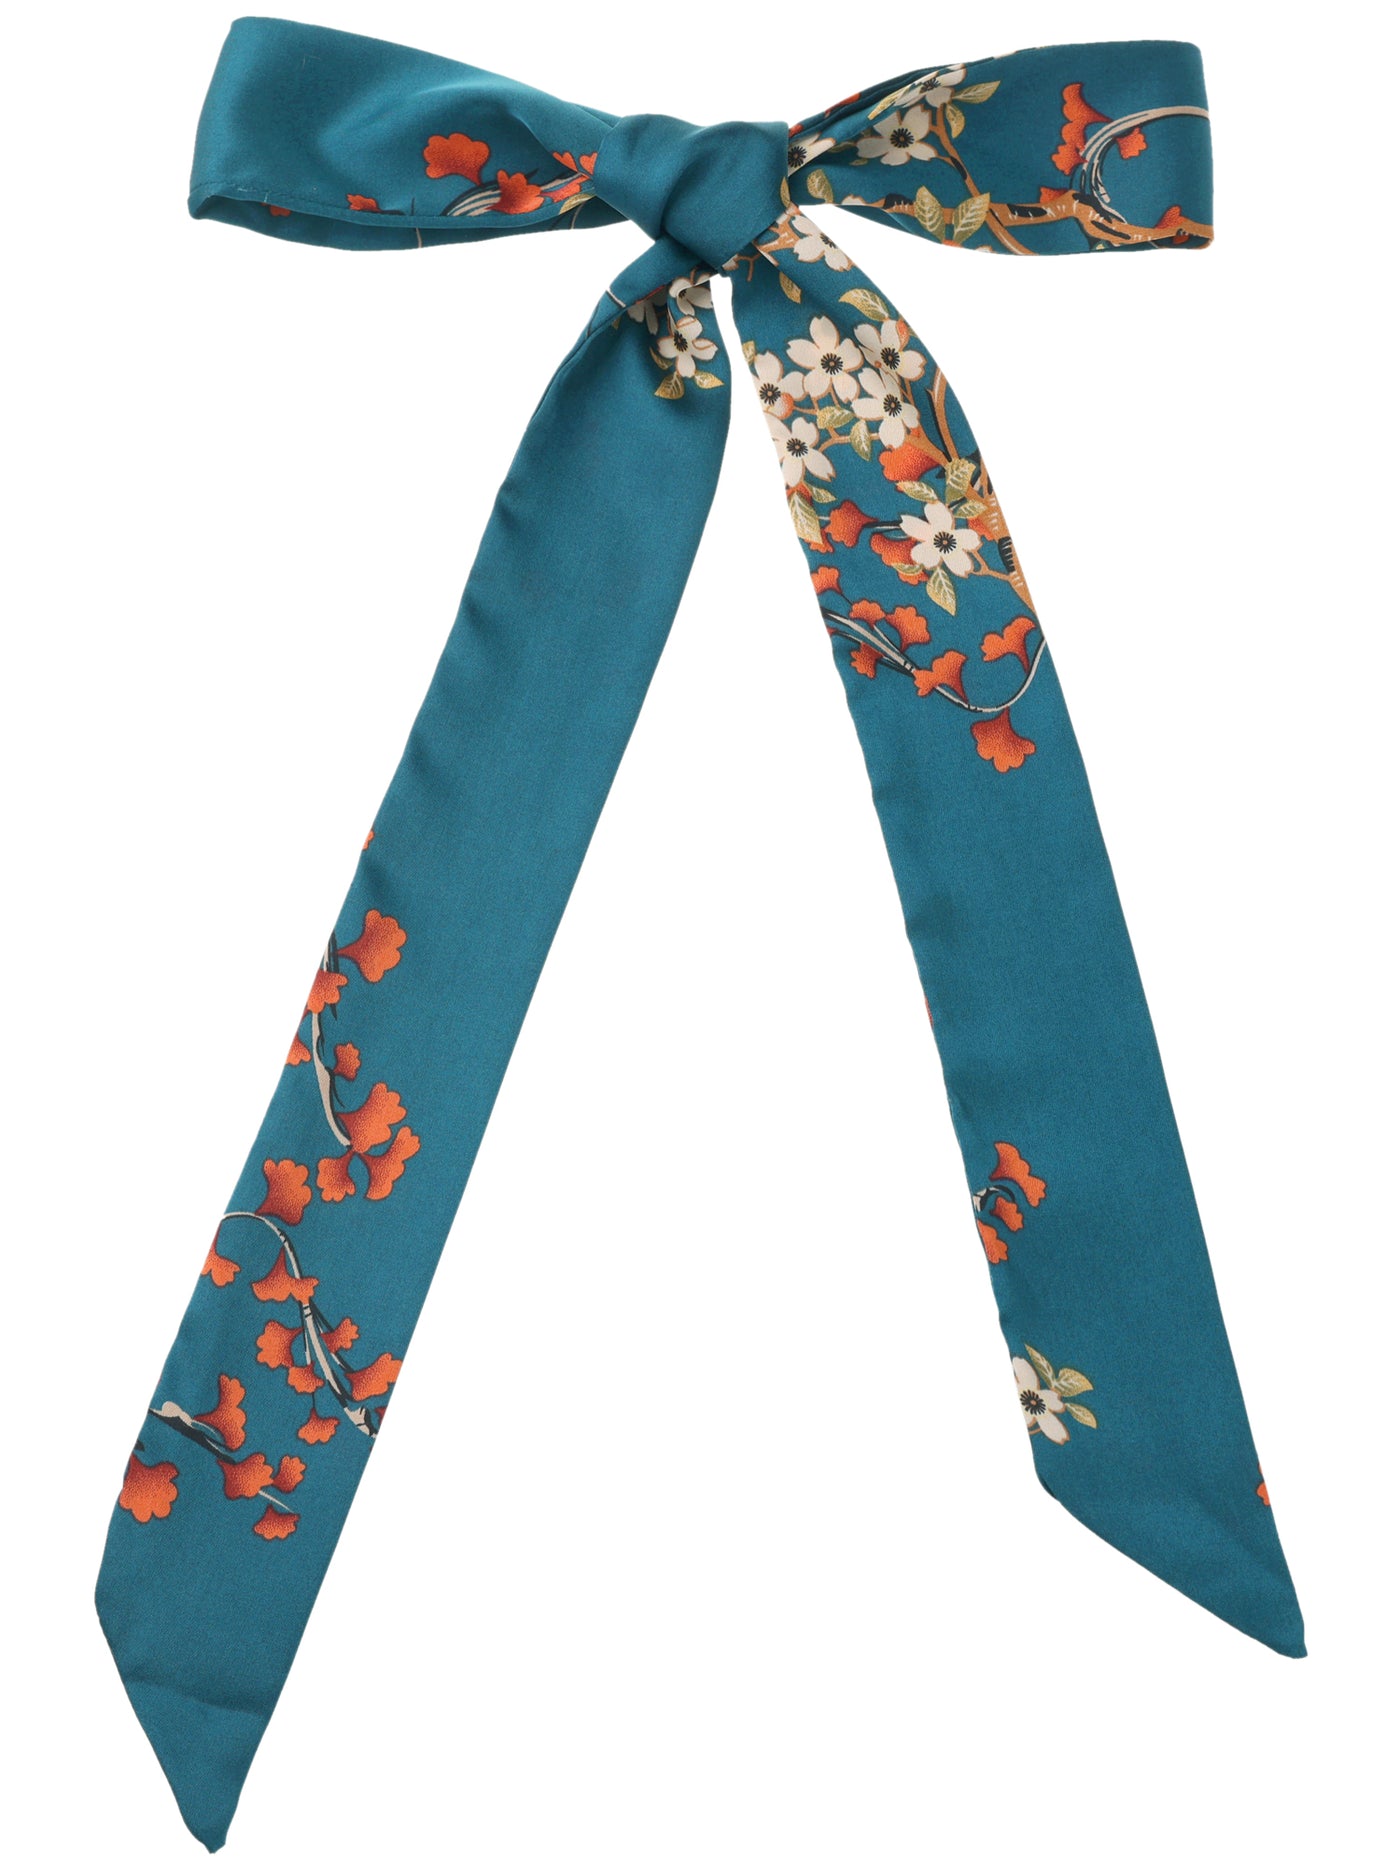 Bublédon Women Floral Satin Scarves, Flowers Square Silky Neck Scarf Neckerchief, Skinny Long Ribbon Hair Band